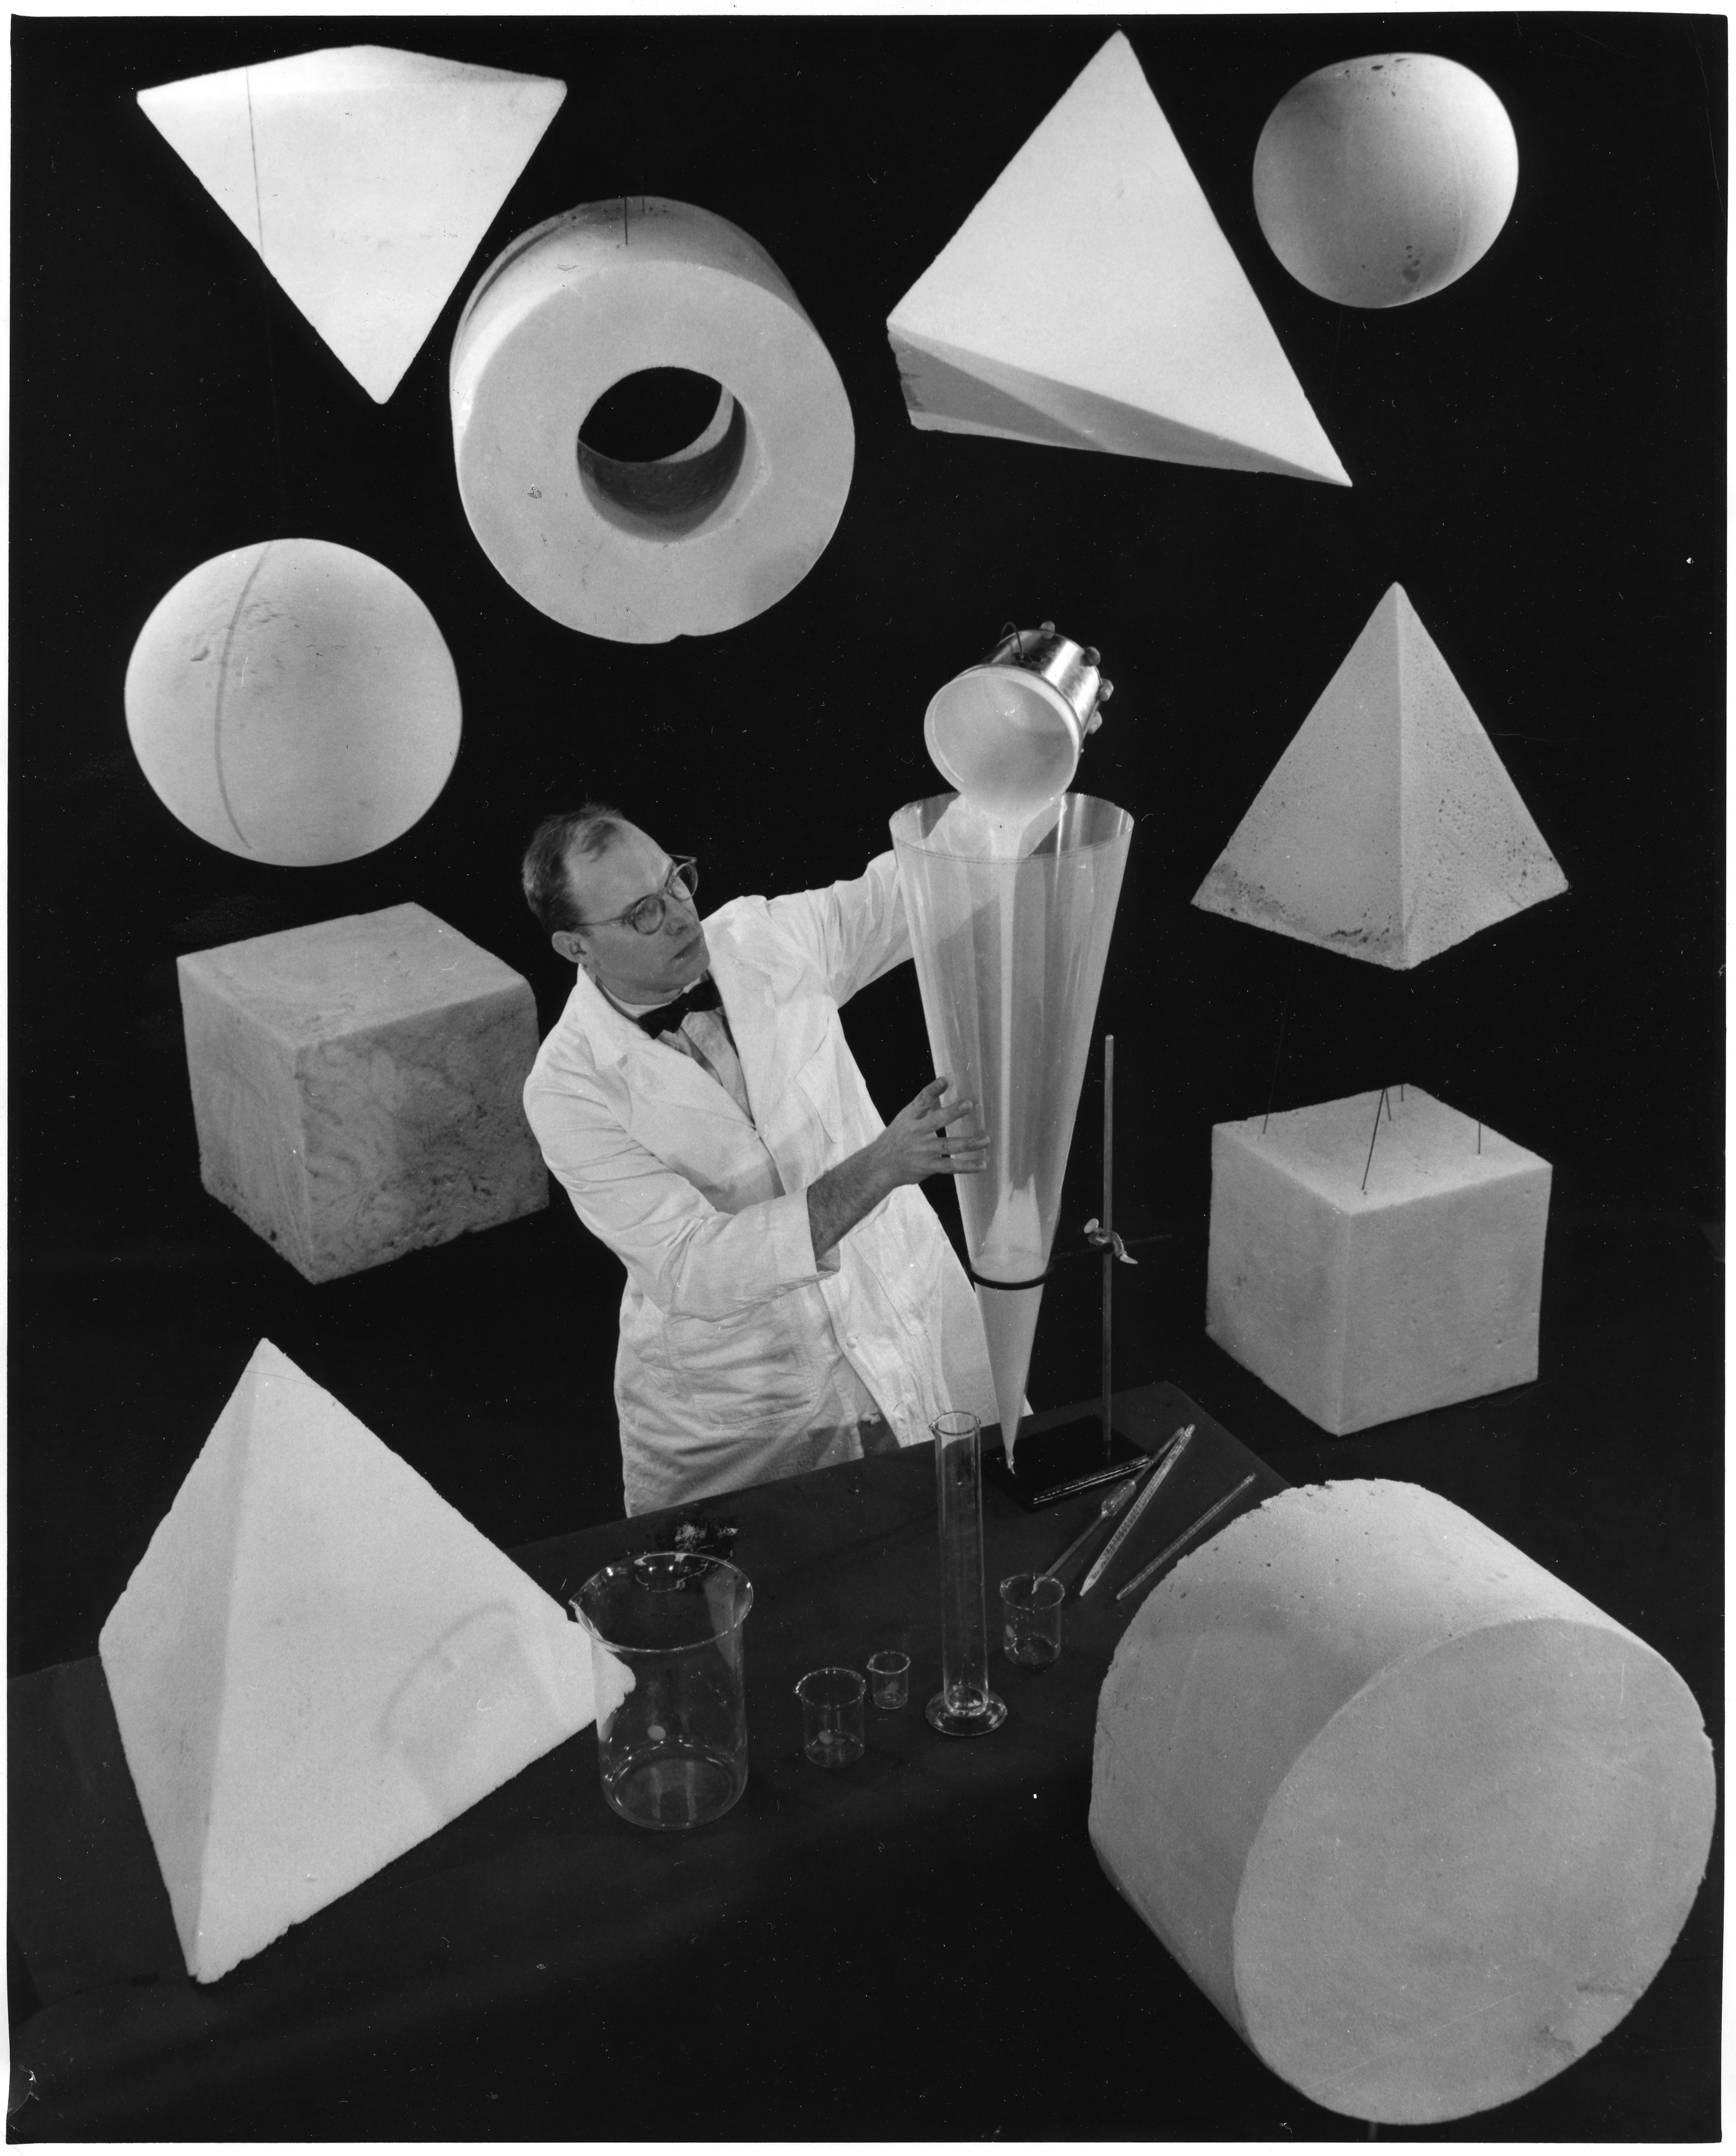 Black and white image of a scientist and scientific apparatus, surrounded by large foam and rubber shapes.